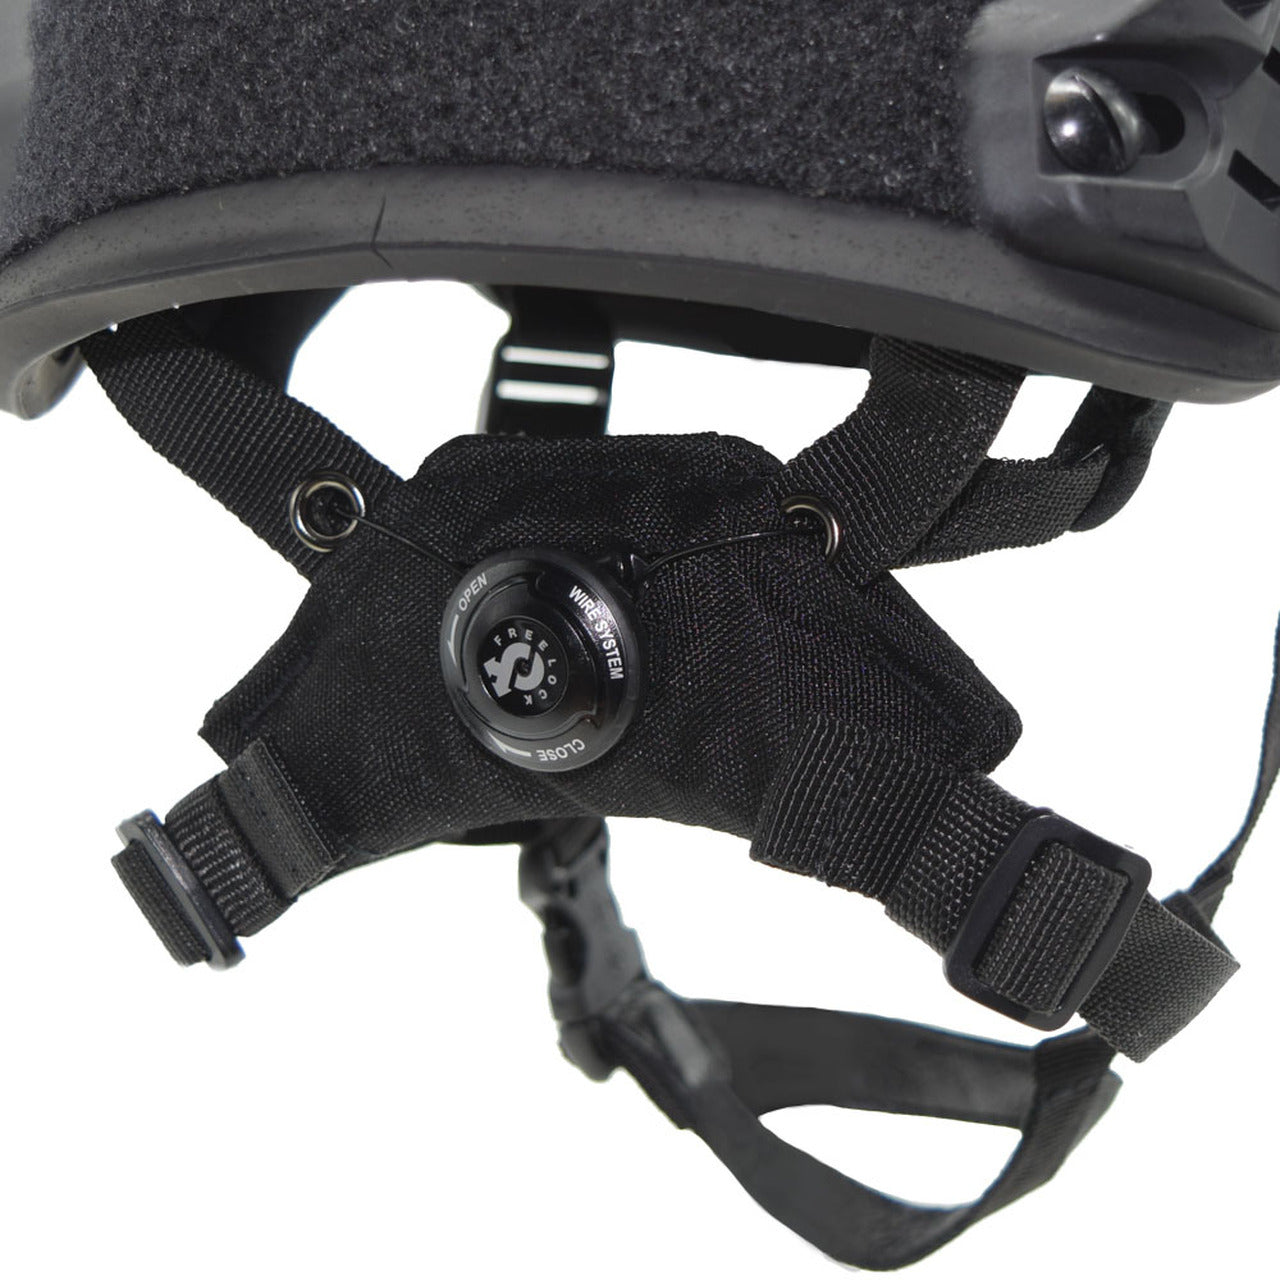 An image of a Shellback Tactical Level IIIA Spec Ops ACH High Cut Ballistic Helmet with a strap.